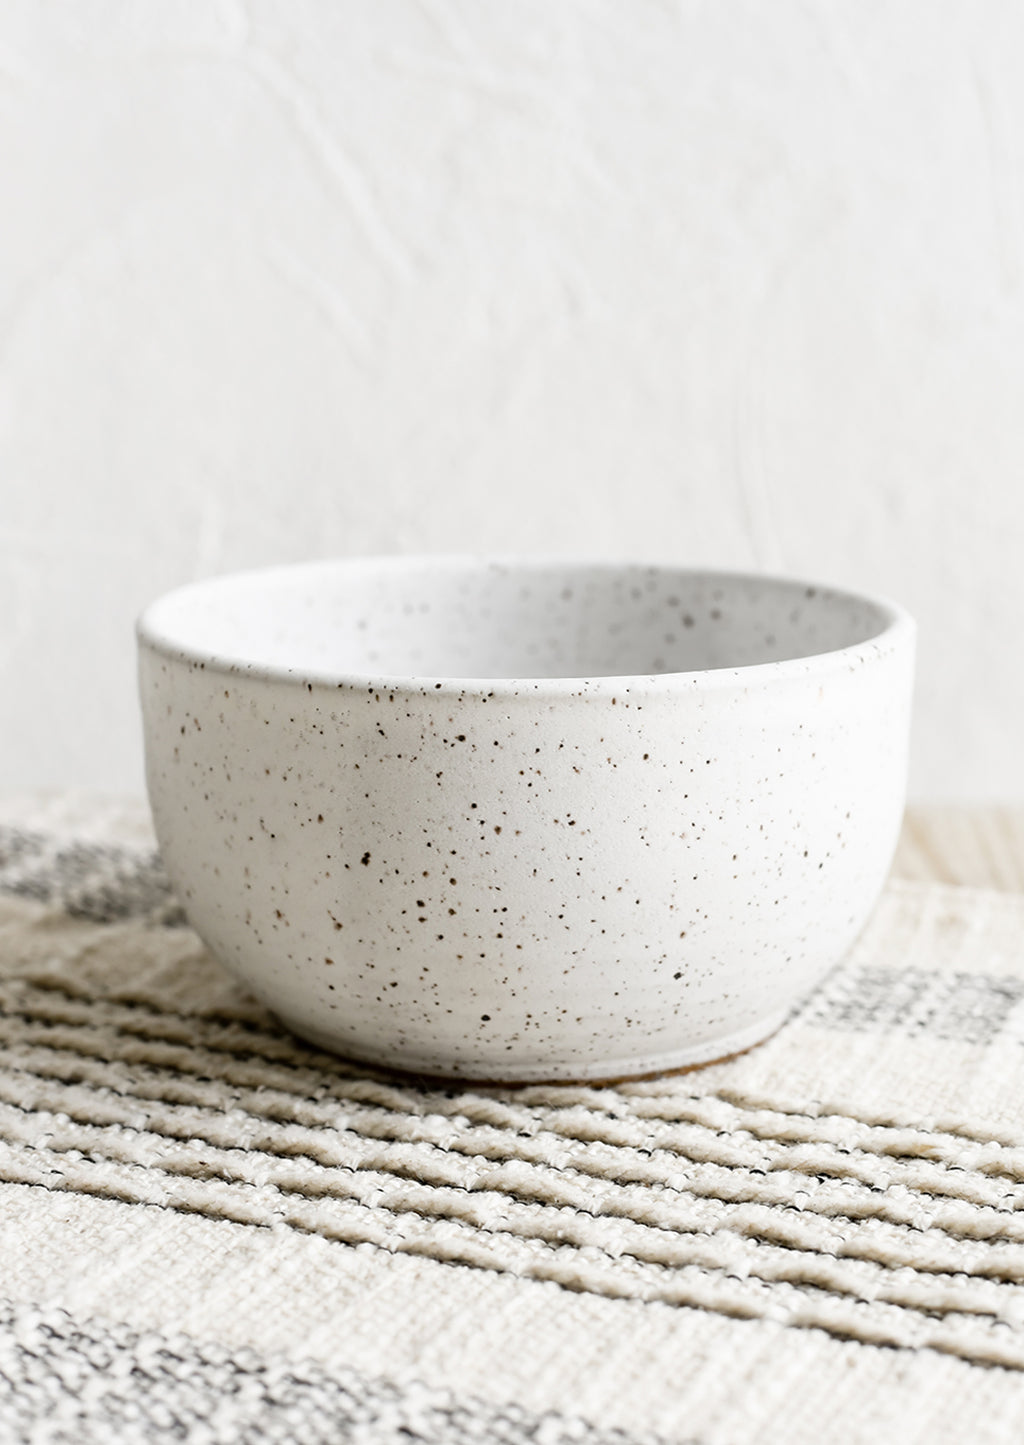 Speckled White / Cereal Bowl: A ceramic cereal bowl in speckled white.